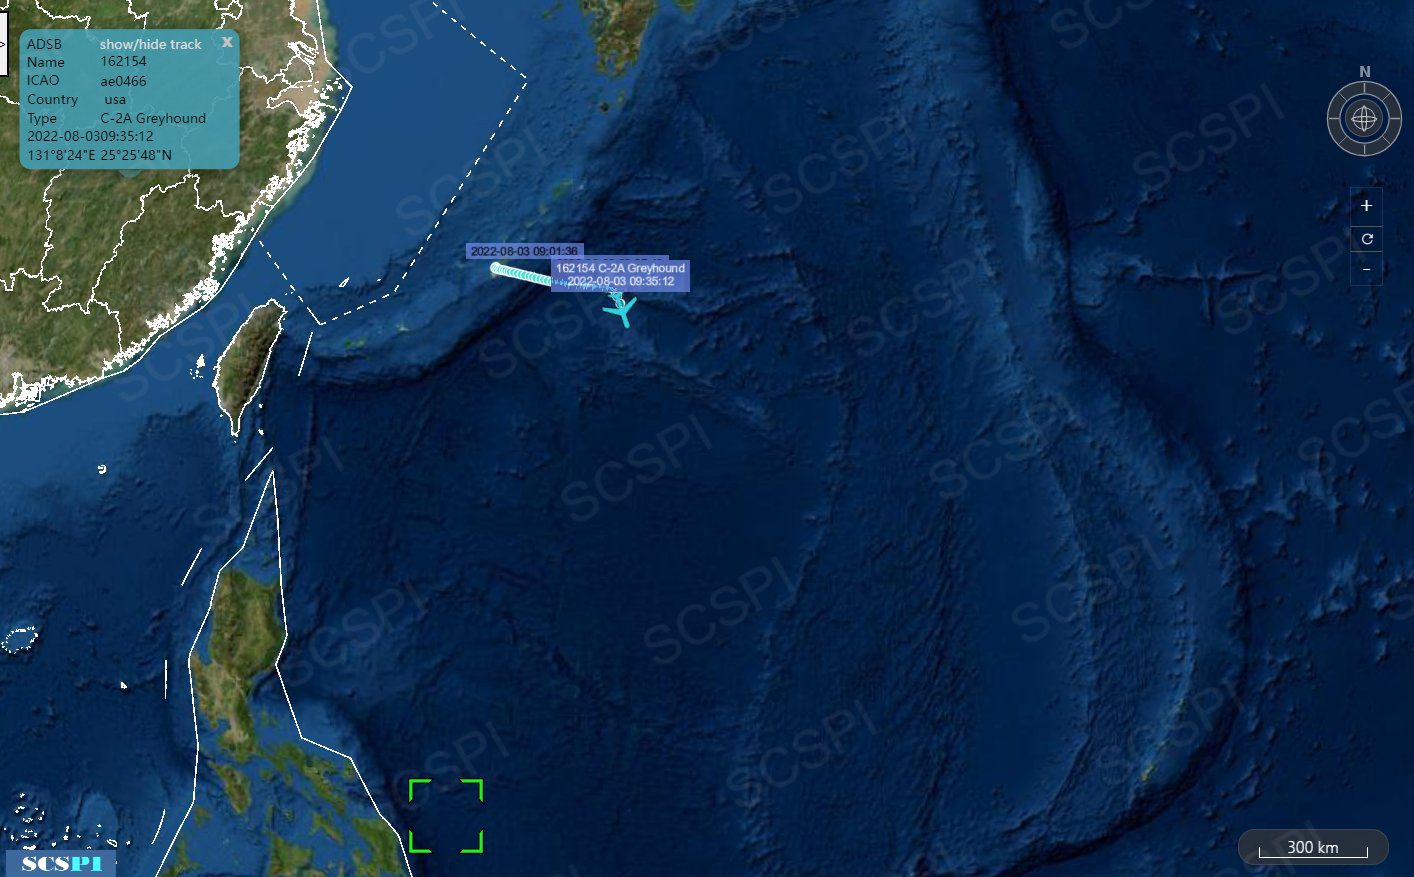 Peking University's South China Sea Strategic Situational Awareness Program (SCSPI) platform uses the flight path of a C-2A Greyhound transport aircraft to locate the last location of the aircraft carrier USS Ronald Reagan (CVN-76). Photo: Flip the SCS Probing Initiative Twitter